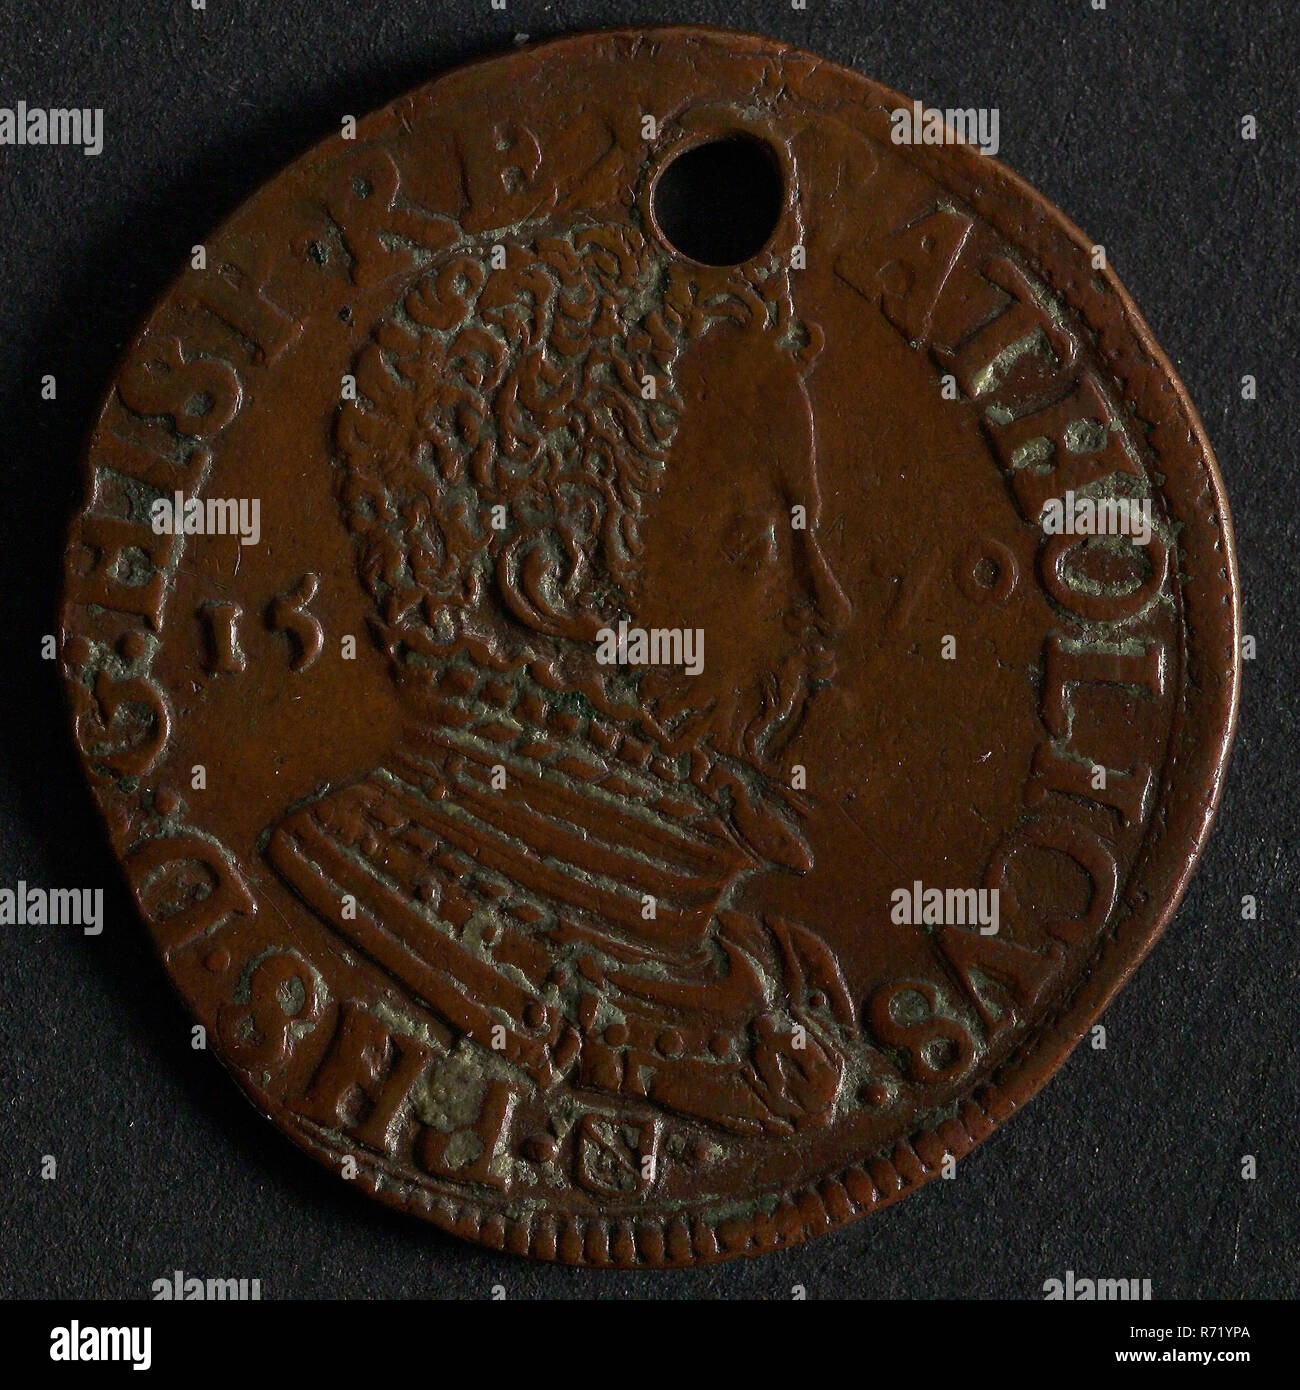 Medal on Philips II and Isabella van Valois, jeton utility medal medal exchange copper, portrait of Philips Omschrift. Currency sign legend: PHS. D: G: HISP. REX. CATHOLICVS.- (mintmark) 15-70 (Philips by God's mercy general believer King of Spain) Philips II Isabella of Valois Stock Photo